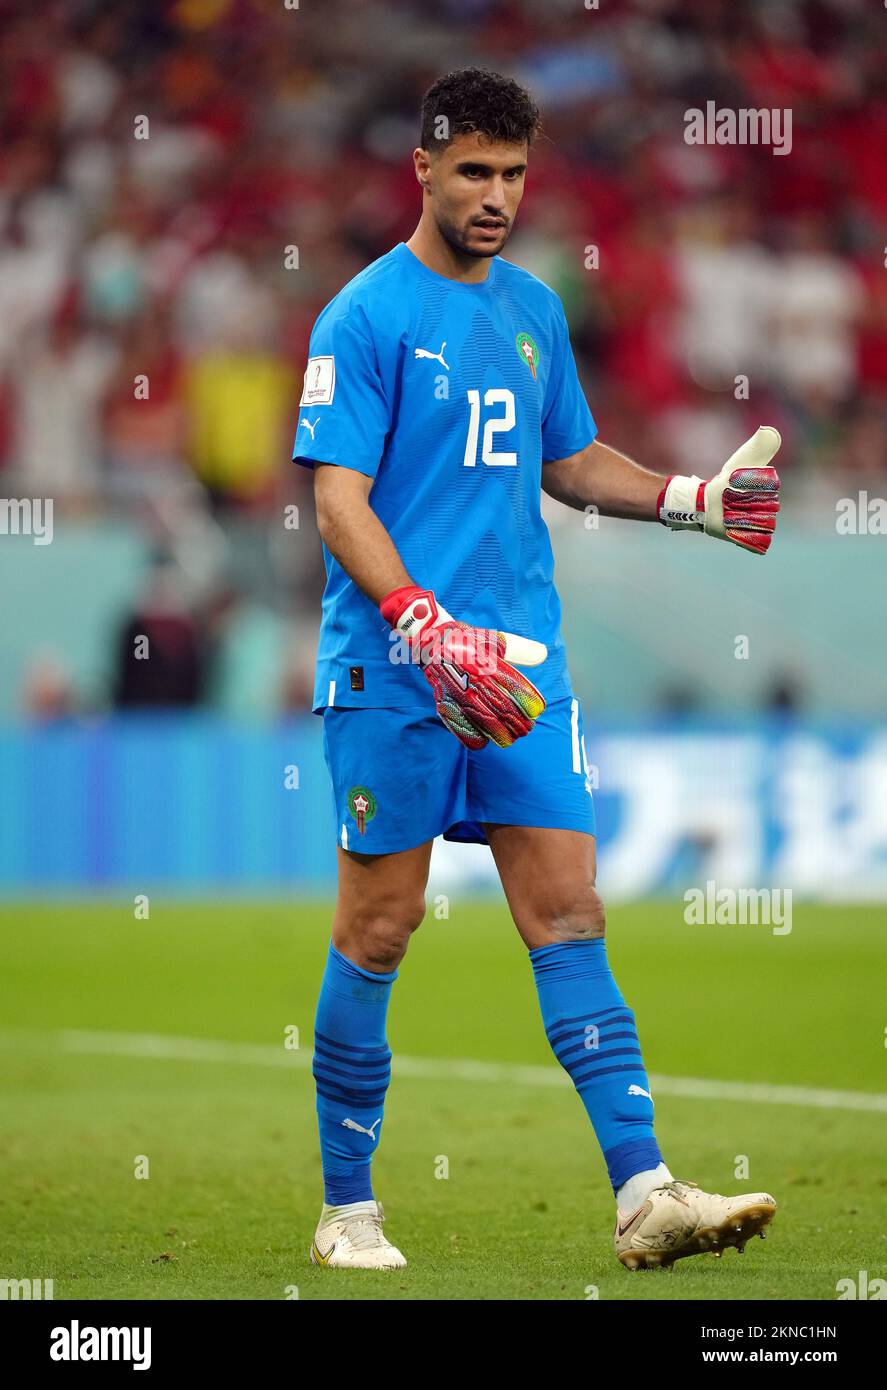 Morocco goalkeeper Munir Mohand Mohamedi during the FIFA World Cup Group F match at the Al Thumama Stadium, Doha, Qatar. Picture date: Sunday November 27, 2022. Stock Photo